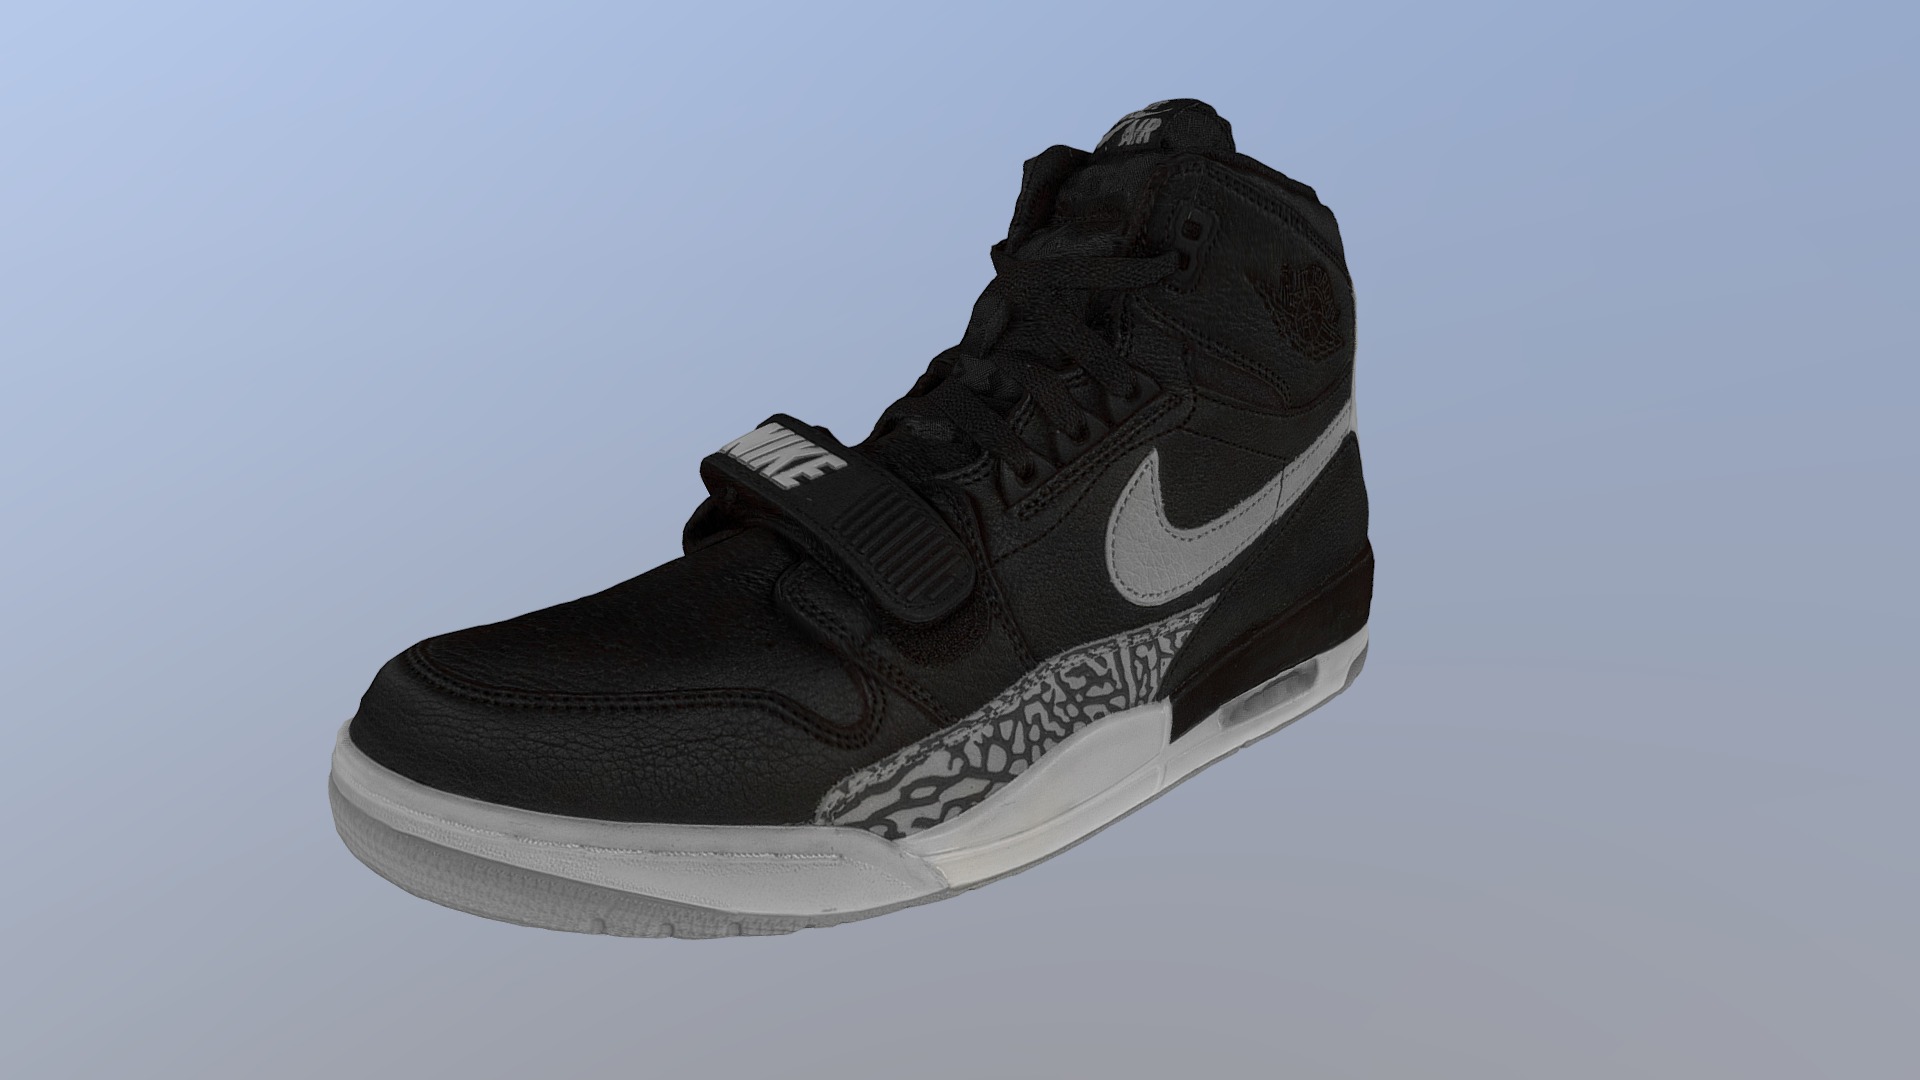 3D model Nike Air Sneaker Shoes - This is a 3D model of the Nike Air Sneaker Shoes. The 3D model is about a black and white shoe.